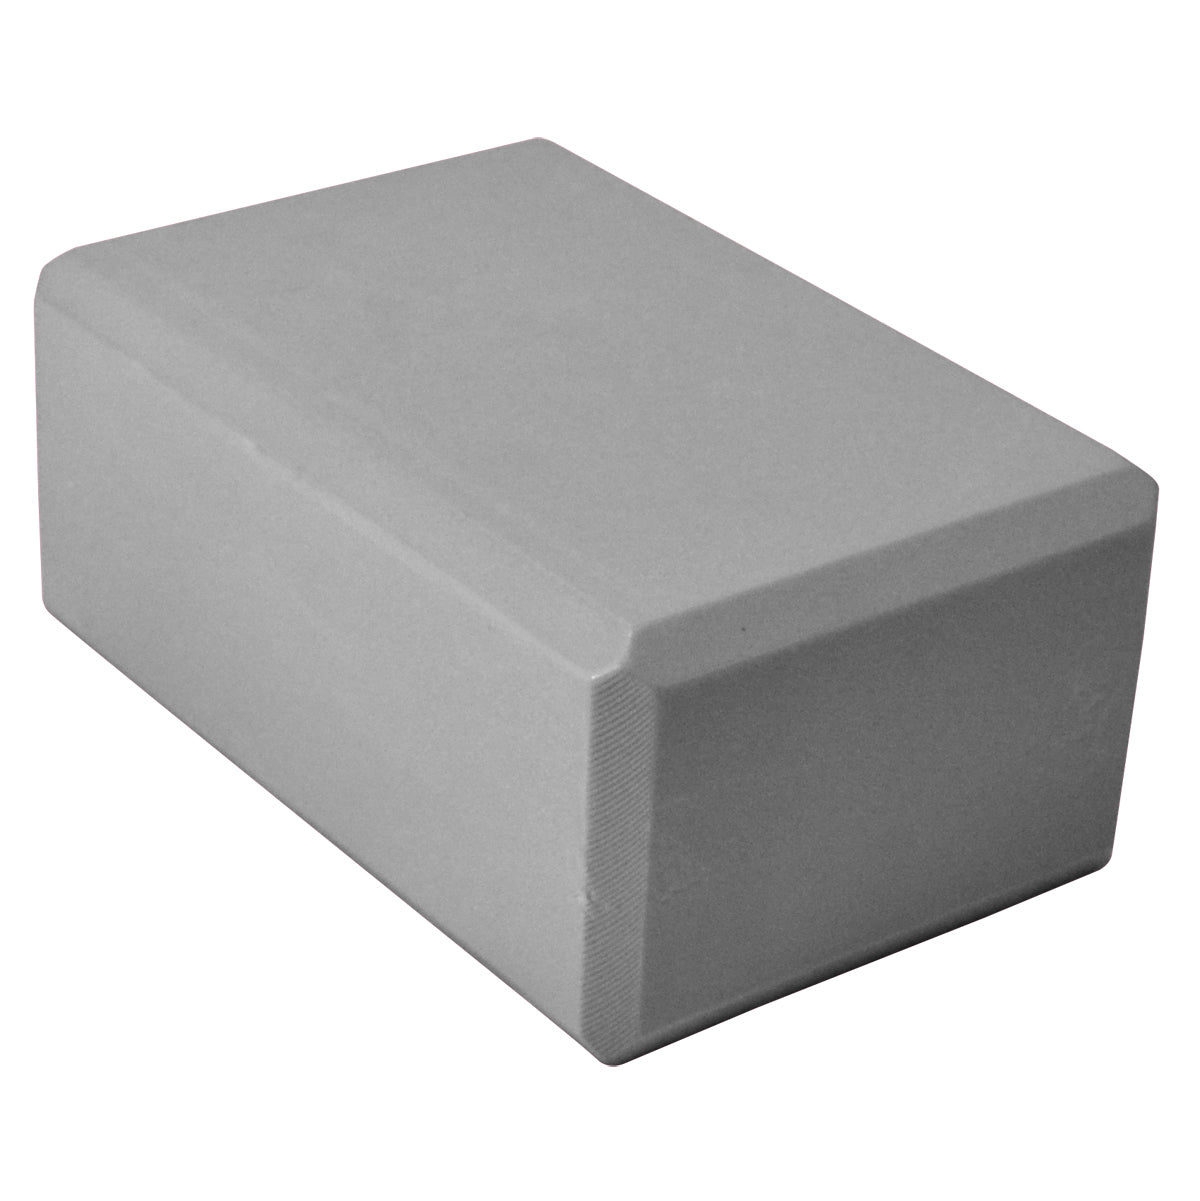 Buy SET OF 4 Yoga Blocks made from Chip Foam Online at